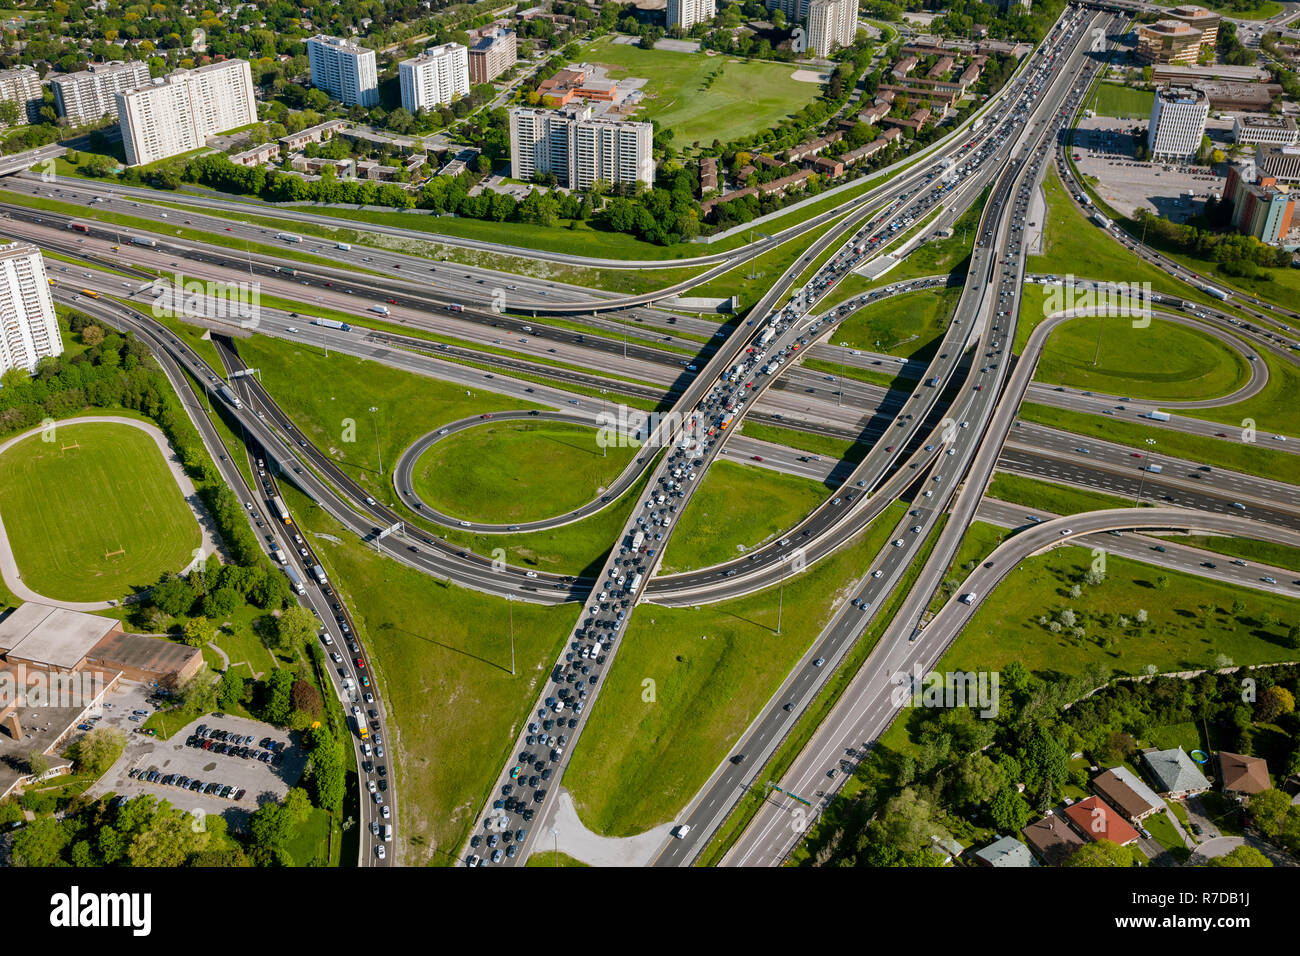 An Aerial view of Highway interchange at Highway 401 and 404/Don Valley Parkway, Toronto. Stock Photo